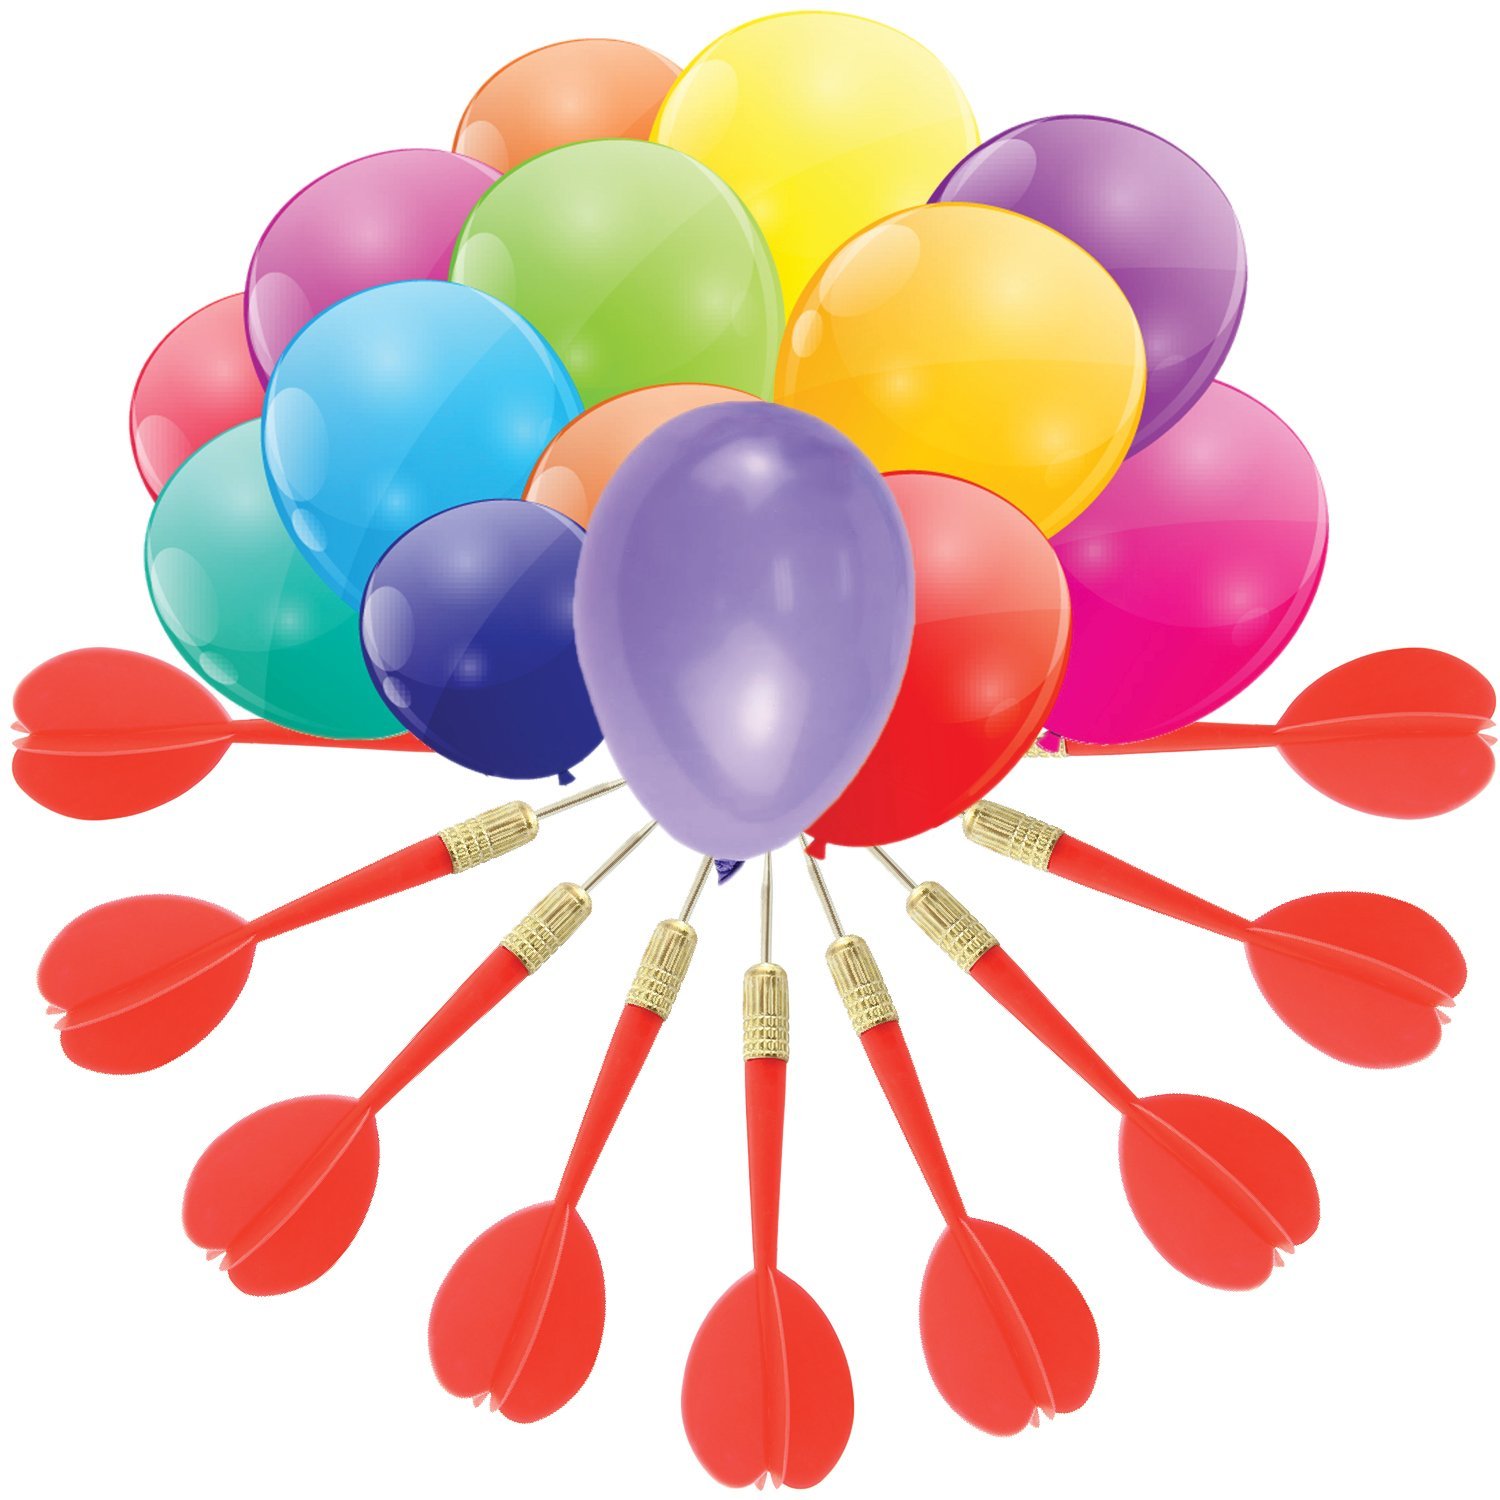 Clip Arts Related To : balloon dart clipart. 